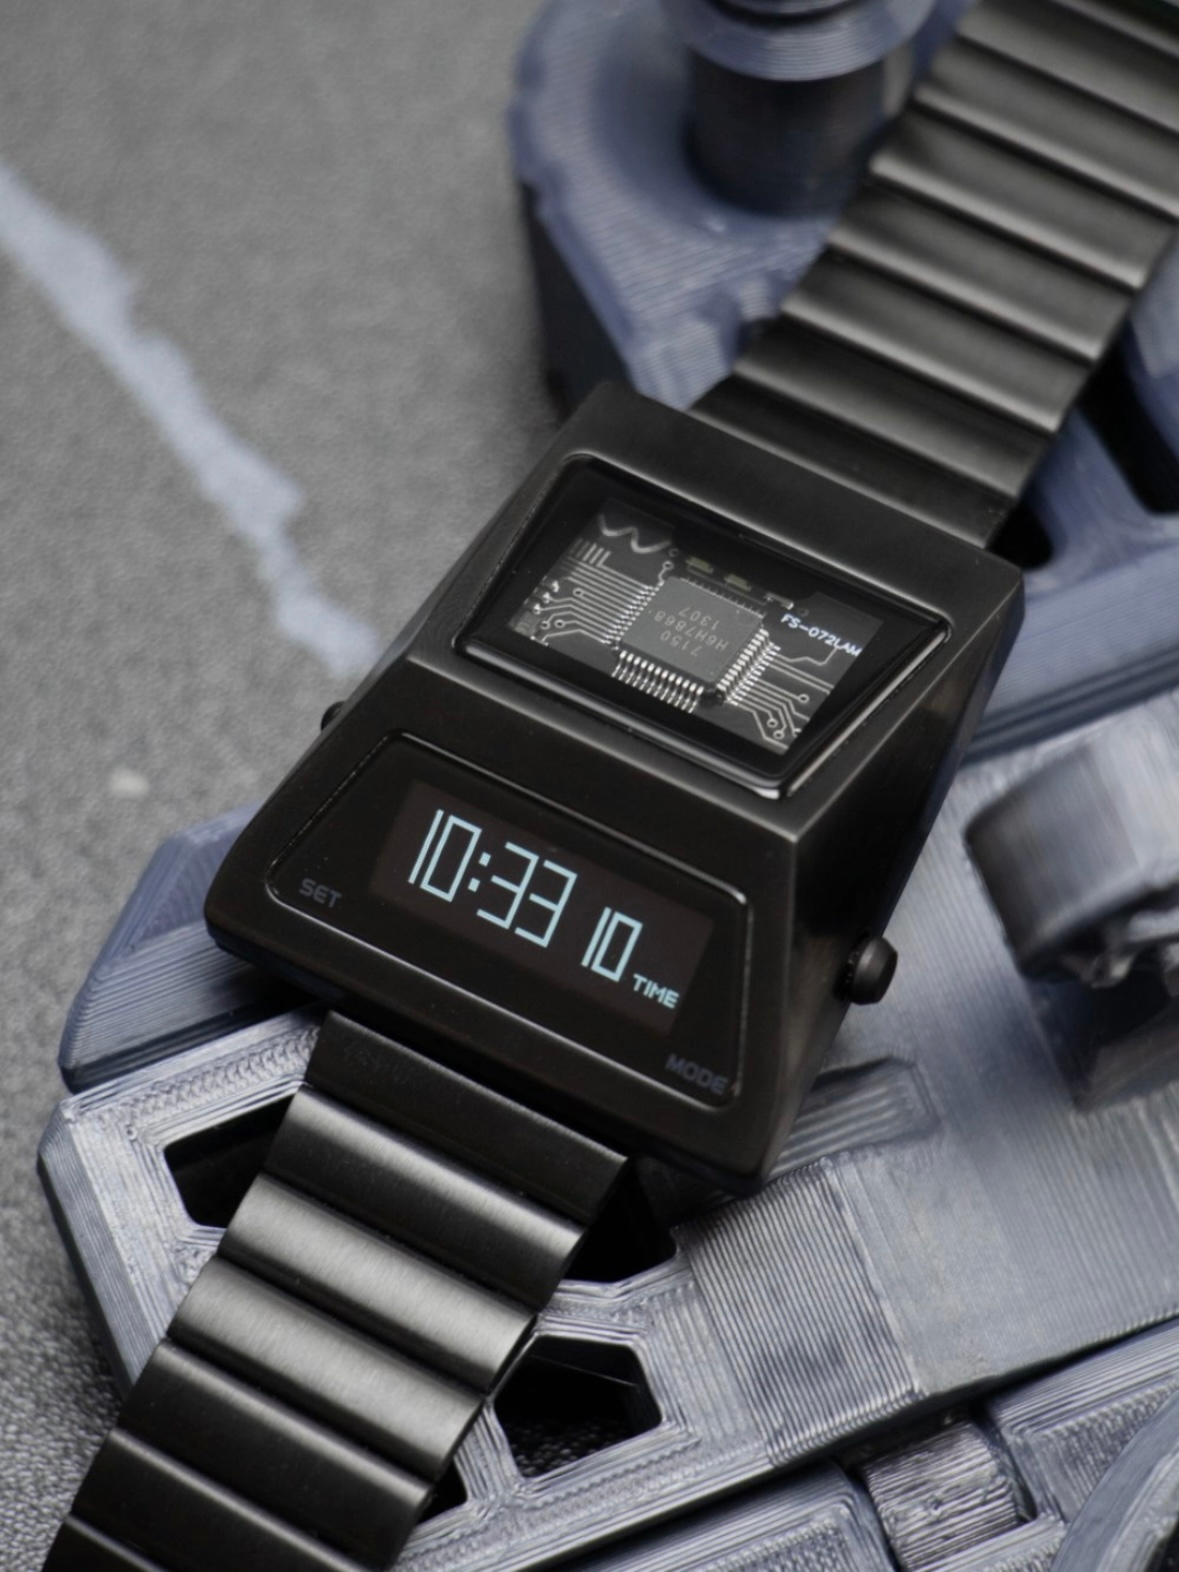 "CYBER WATCHES" S3000-C